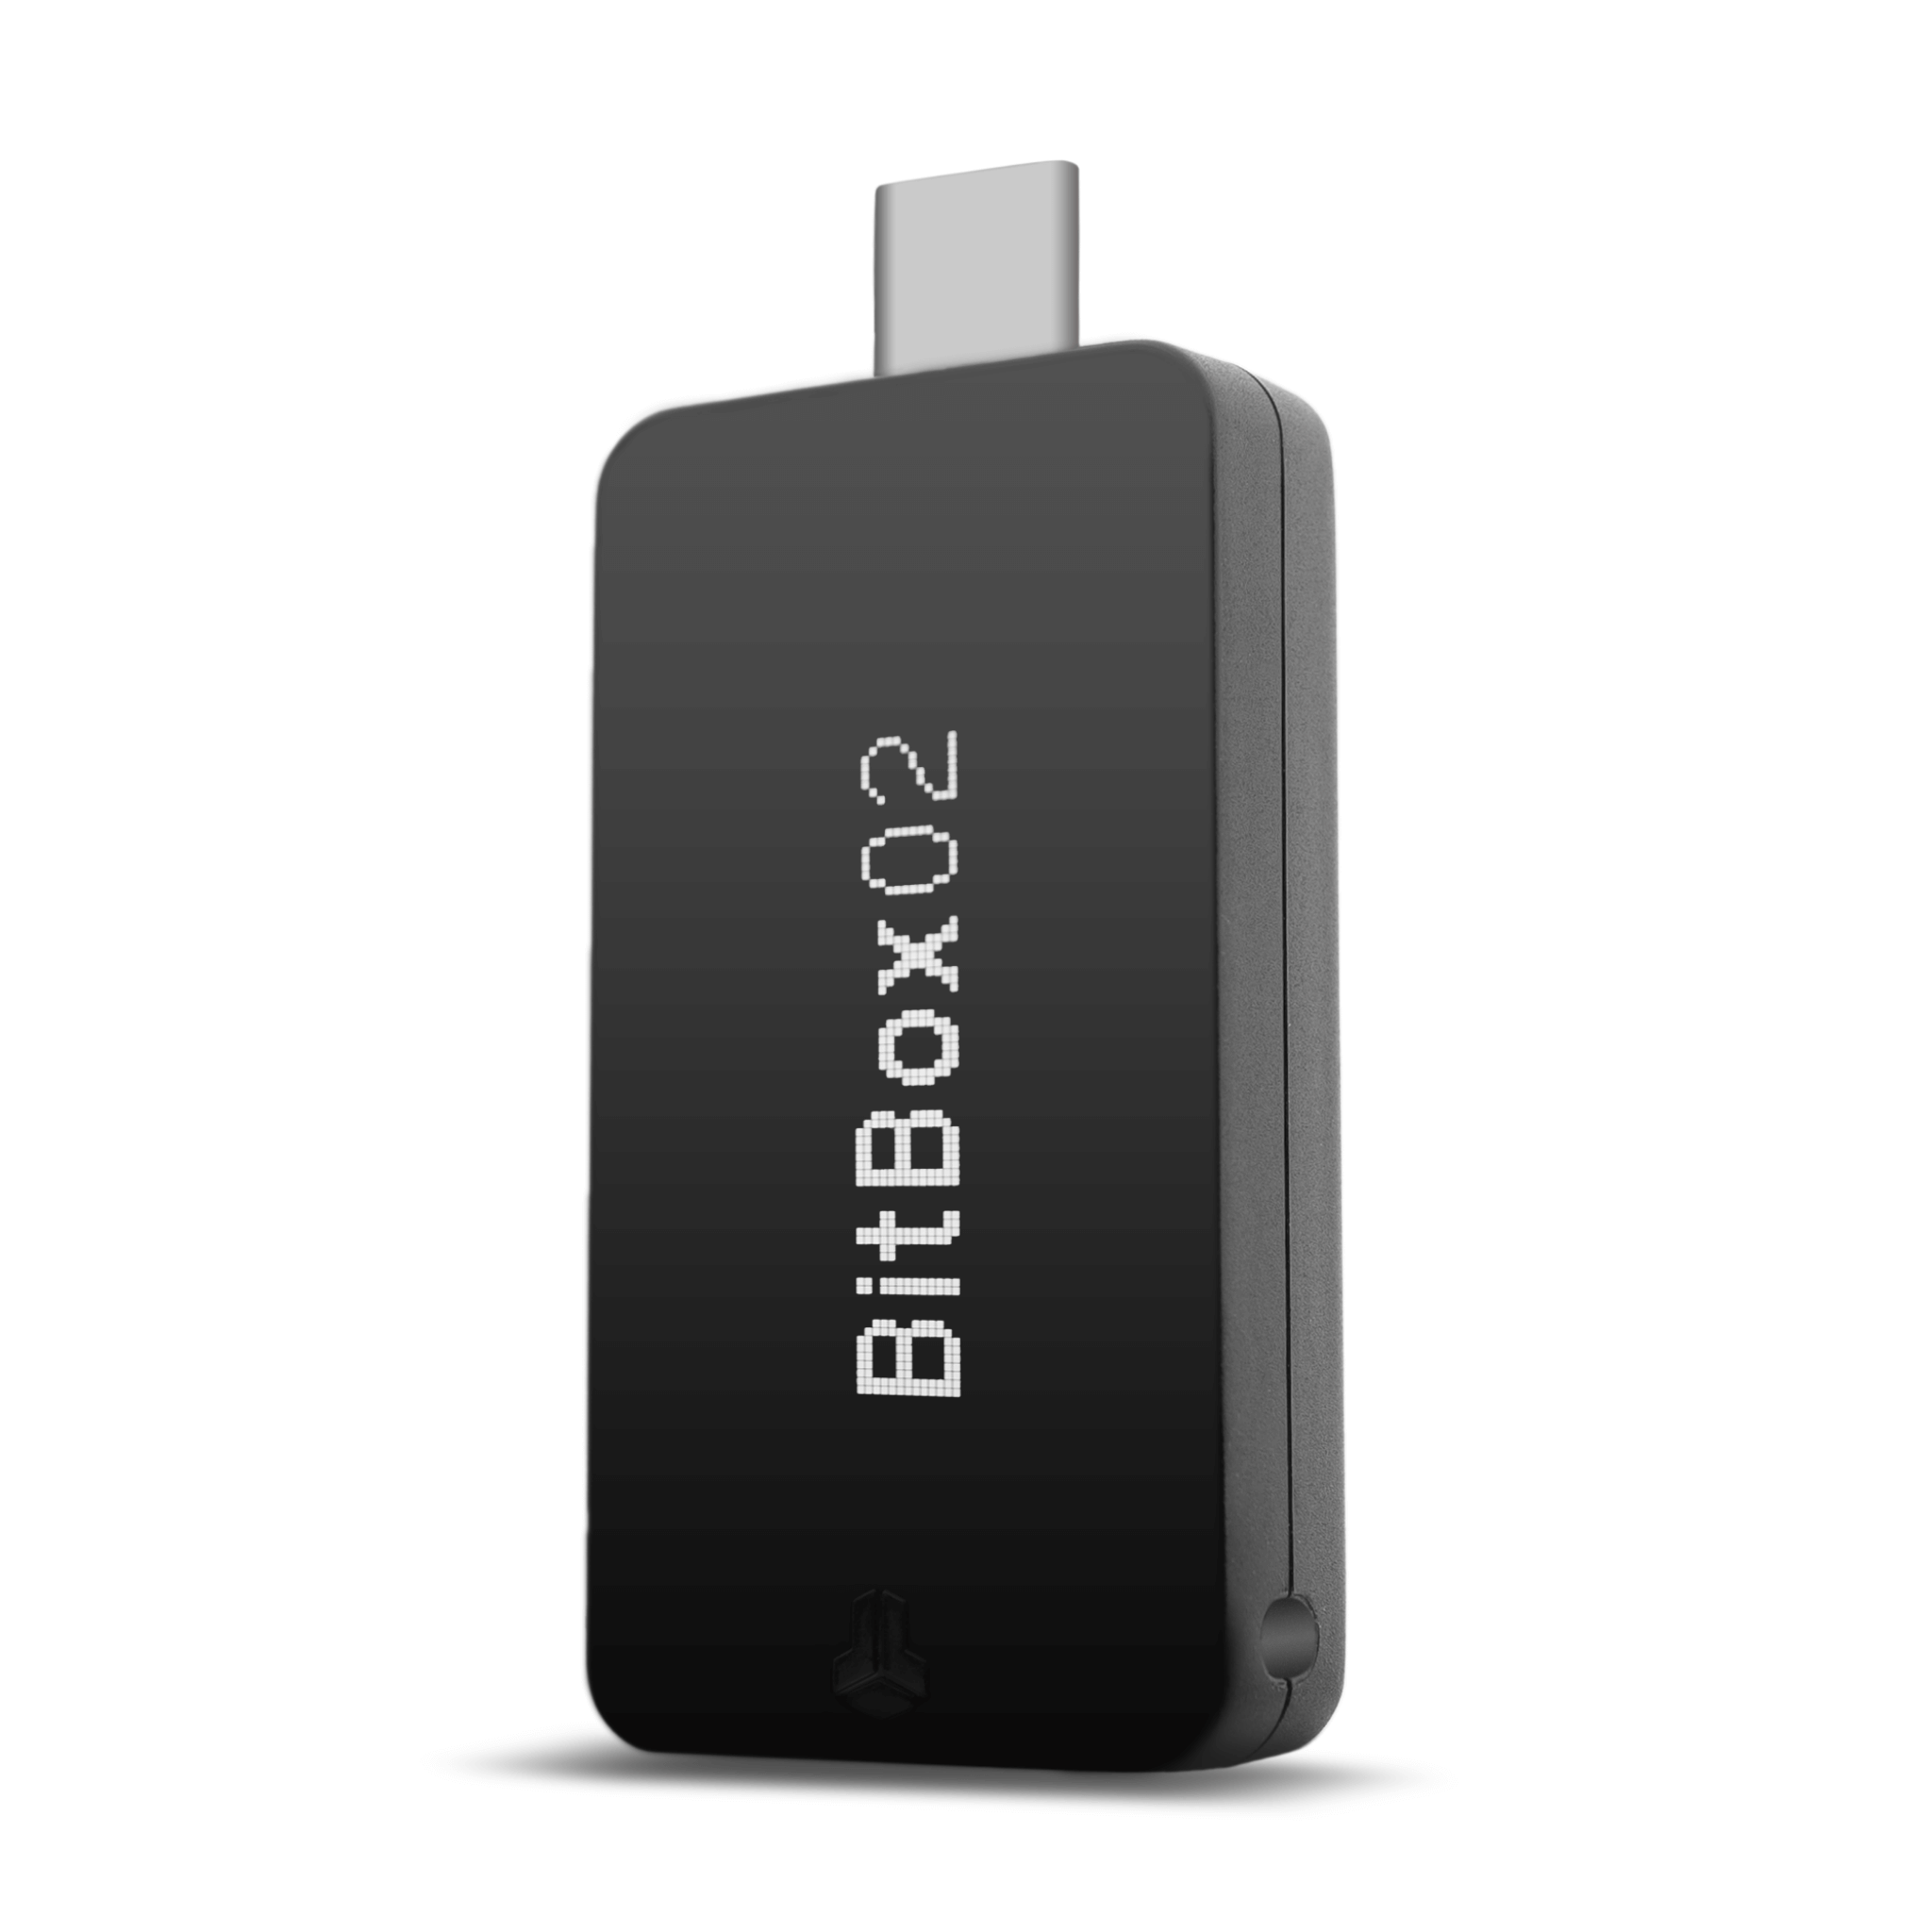 BitBox02 Multi Edition Cryptocurrency Hardware Wallet